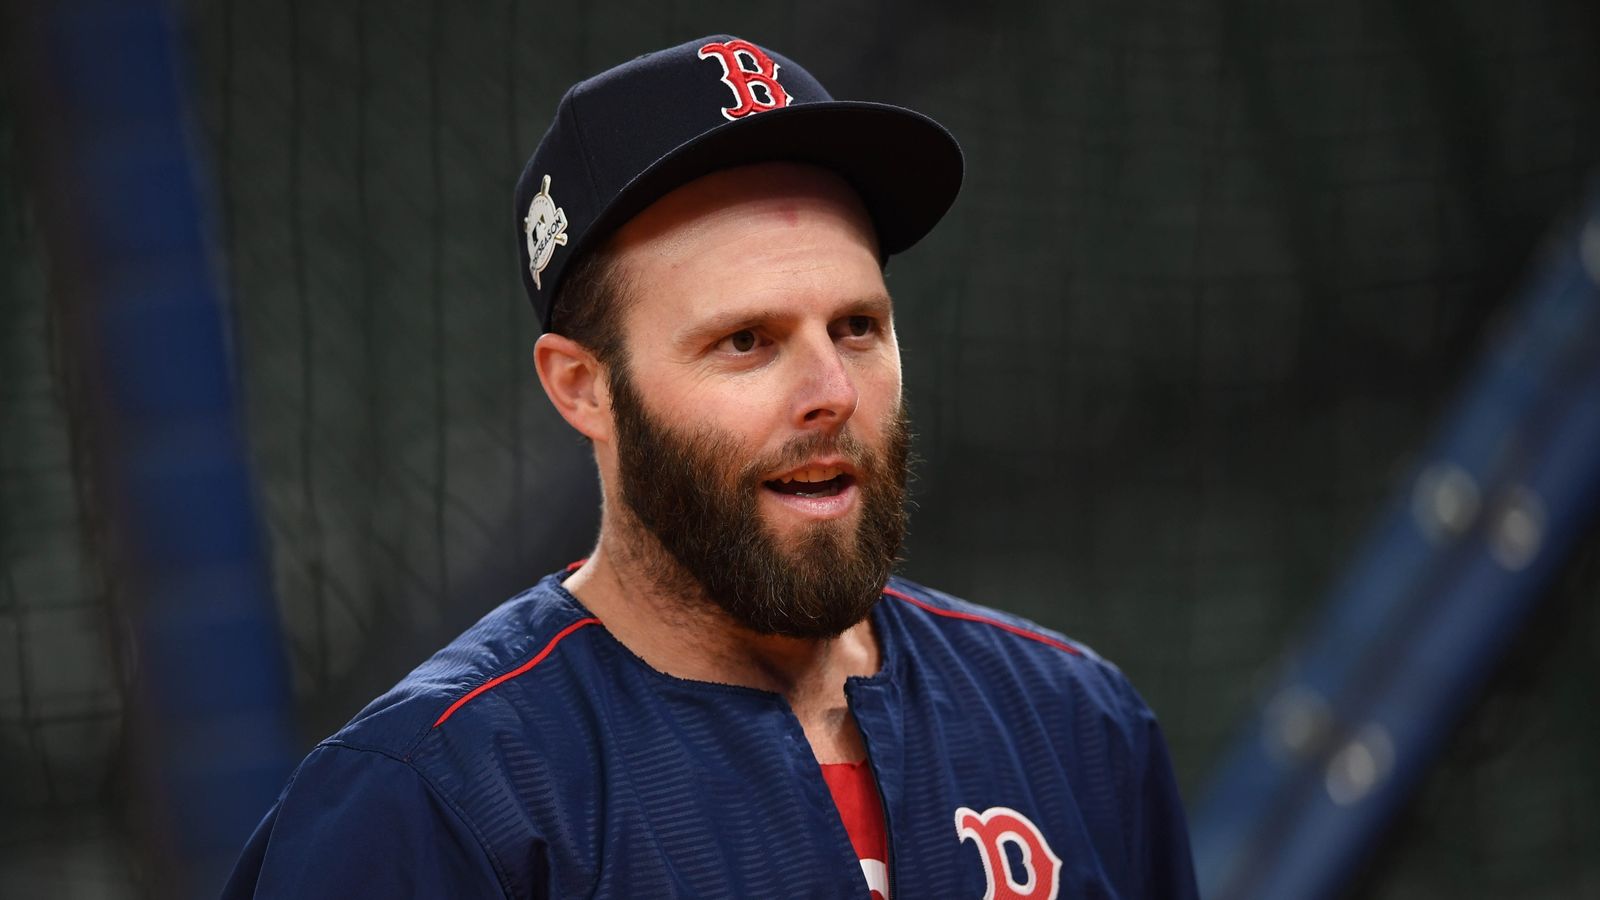 Red Sox 2B Pedroia won't report to spring training on time